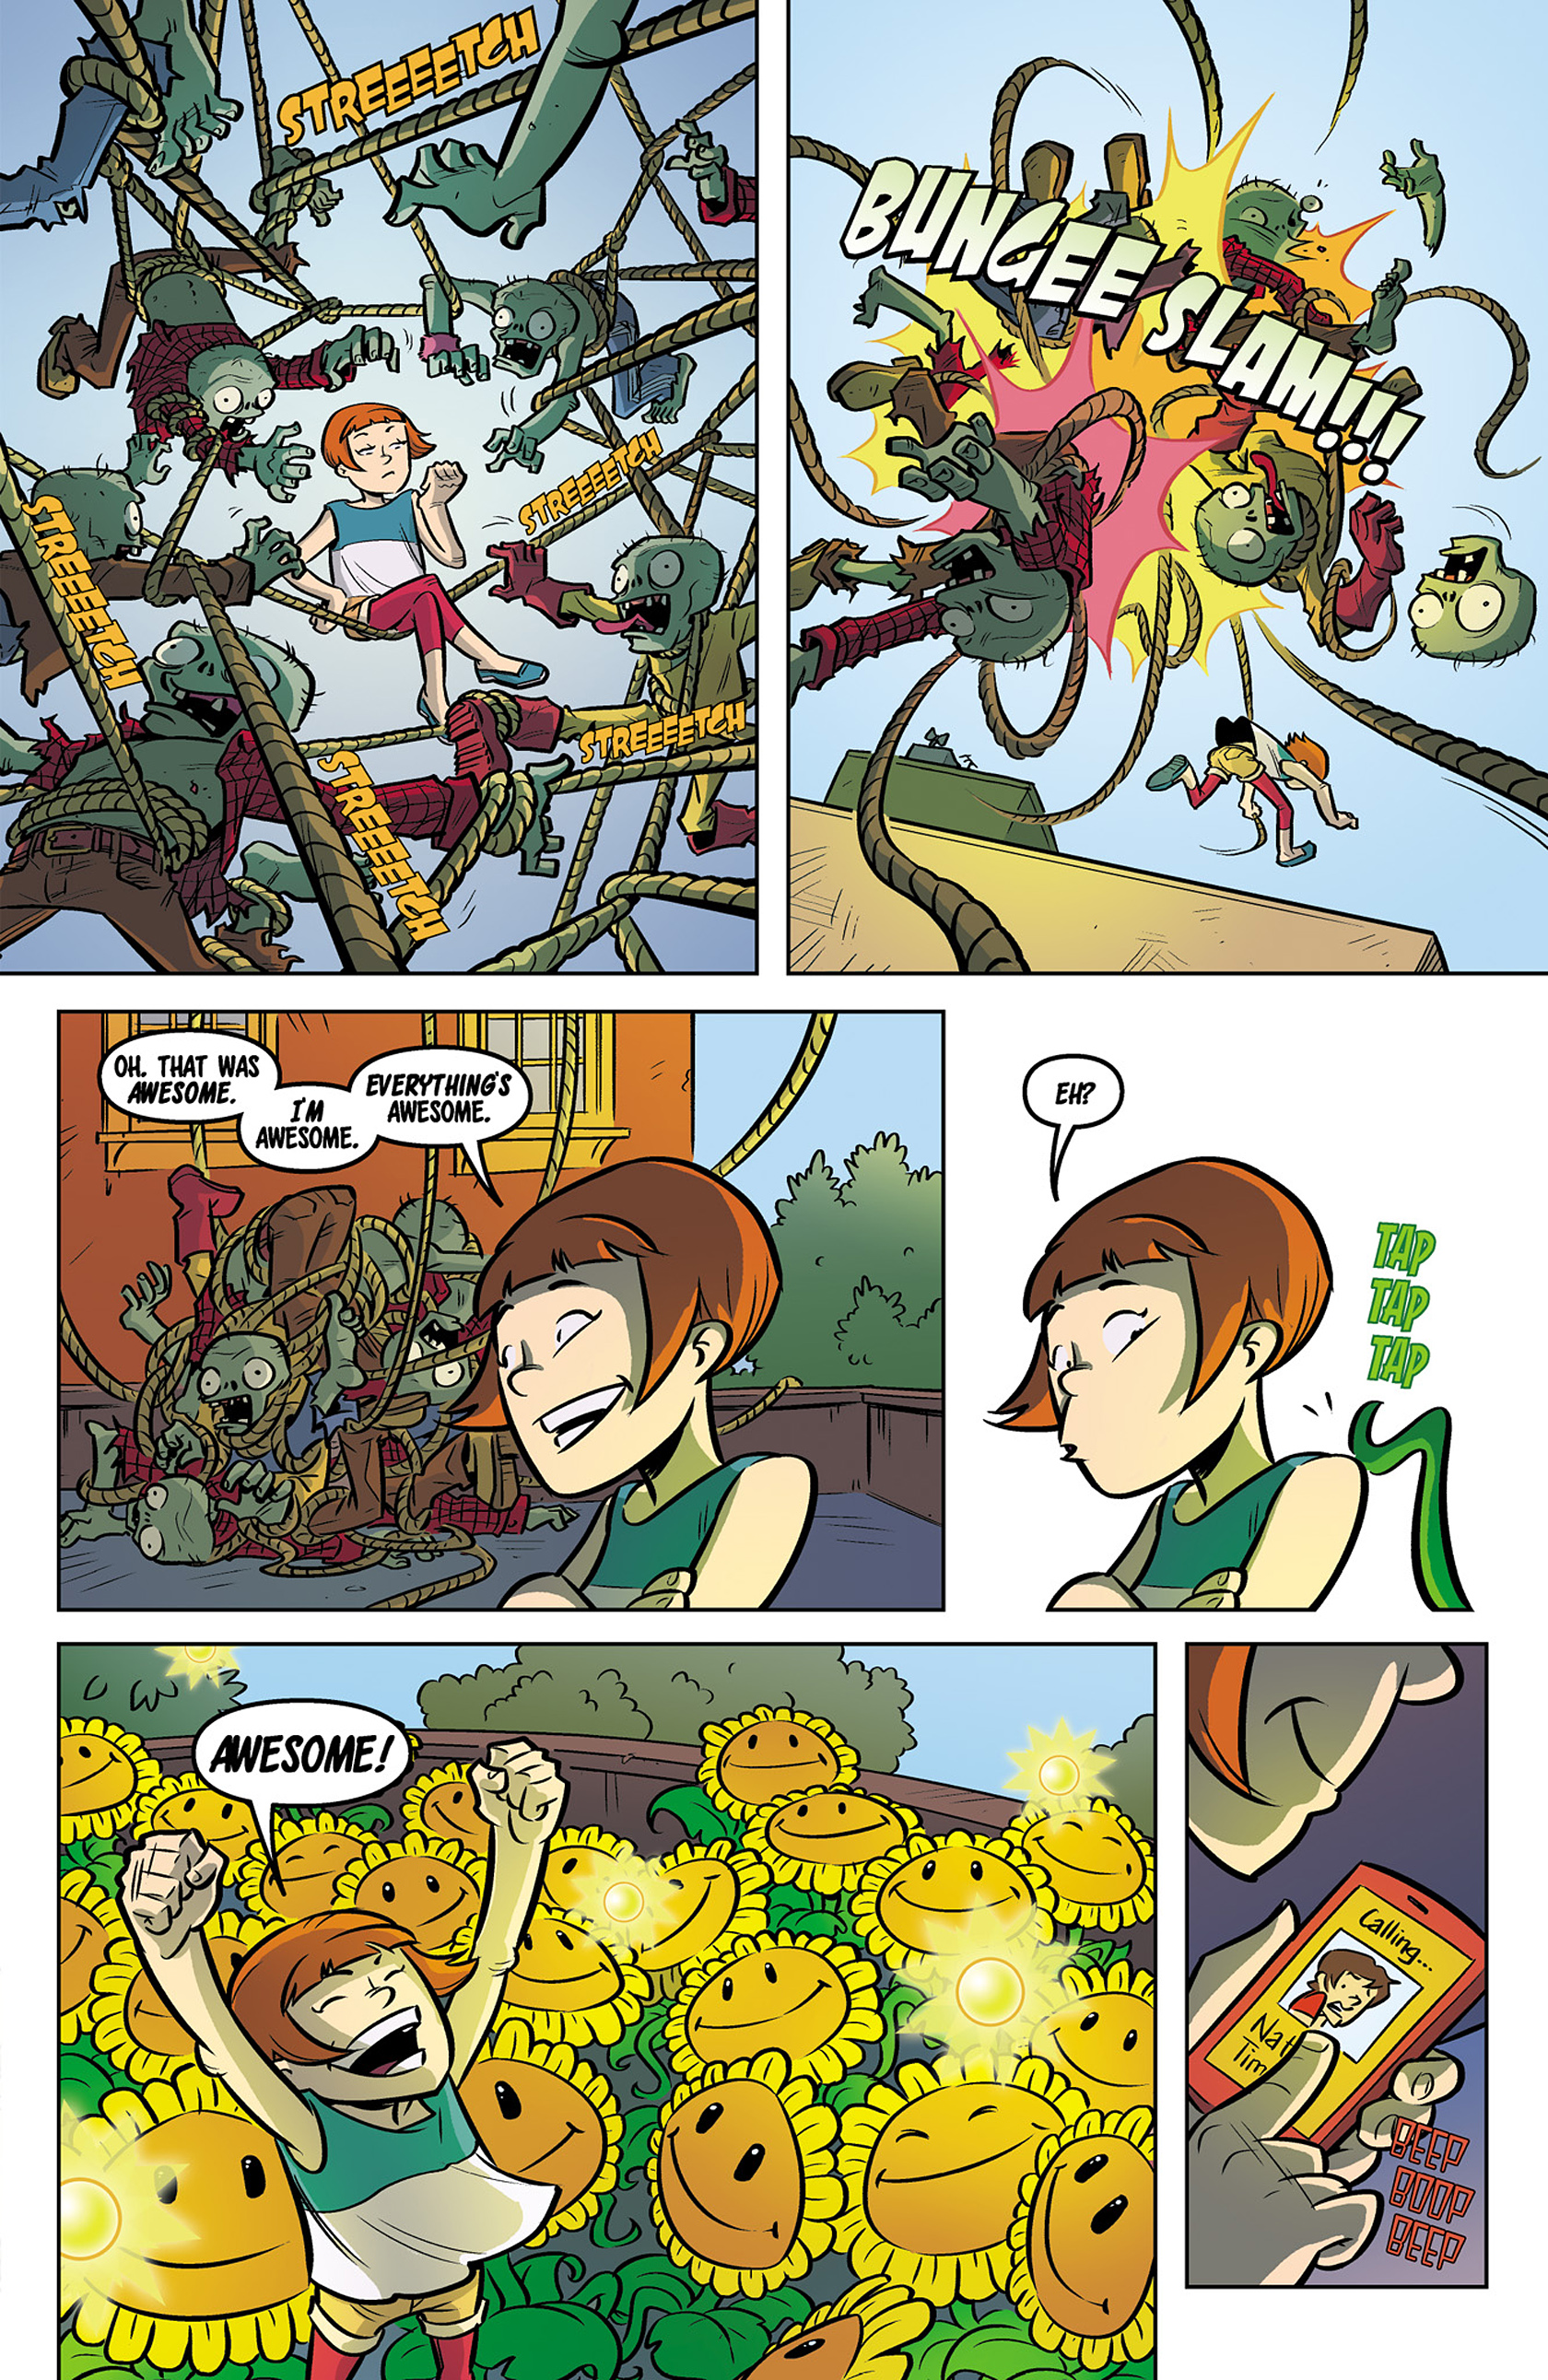 Plants vs. Zombies: Lawnmageddon (2013), Issue 2 by Paul 